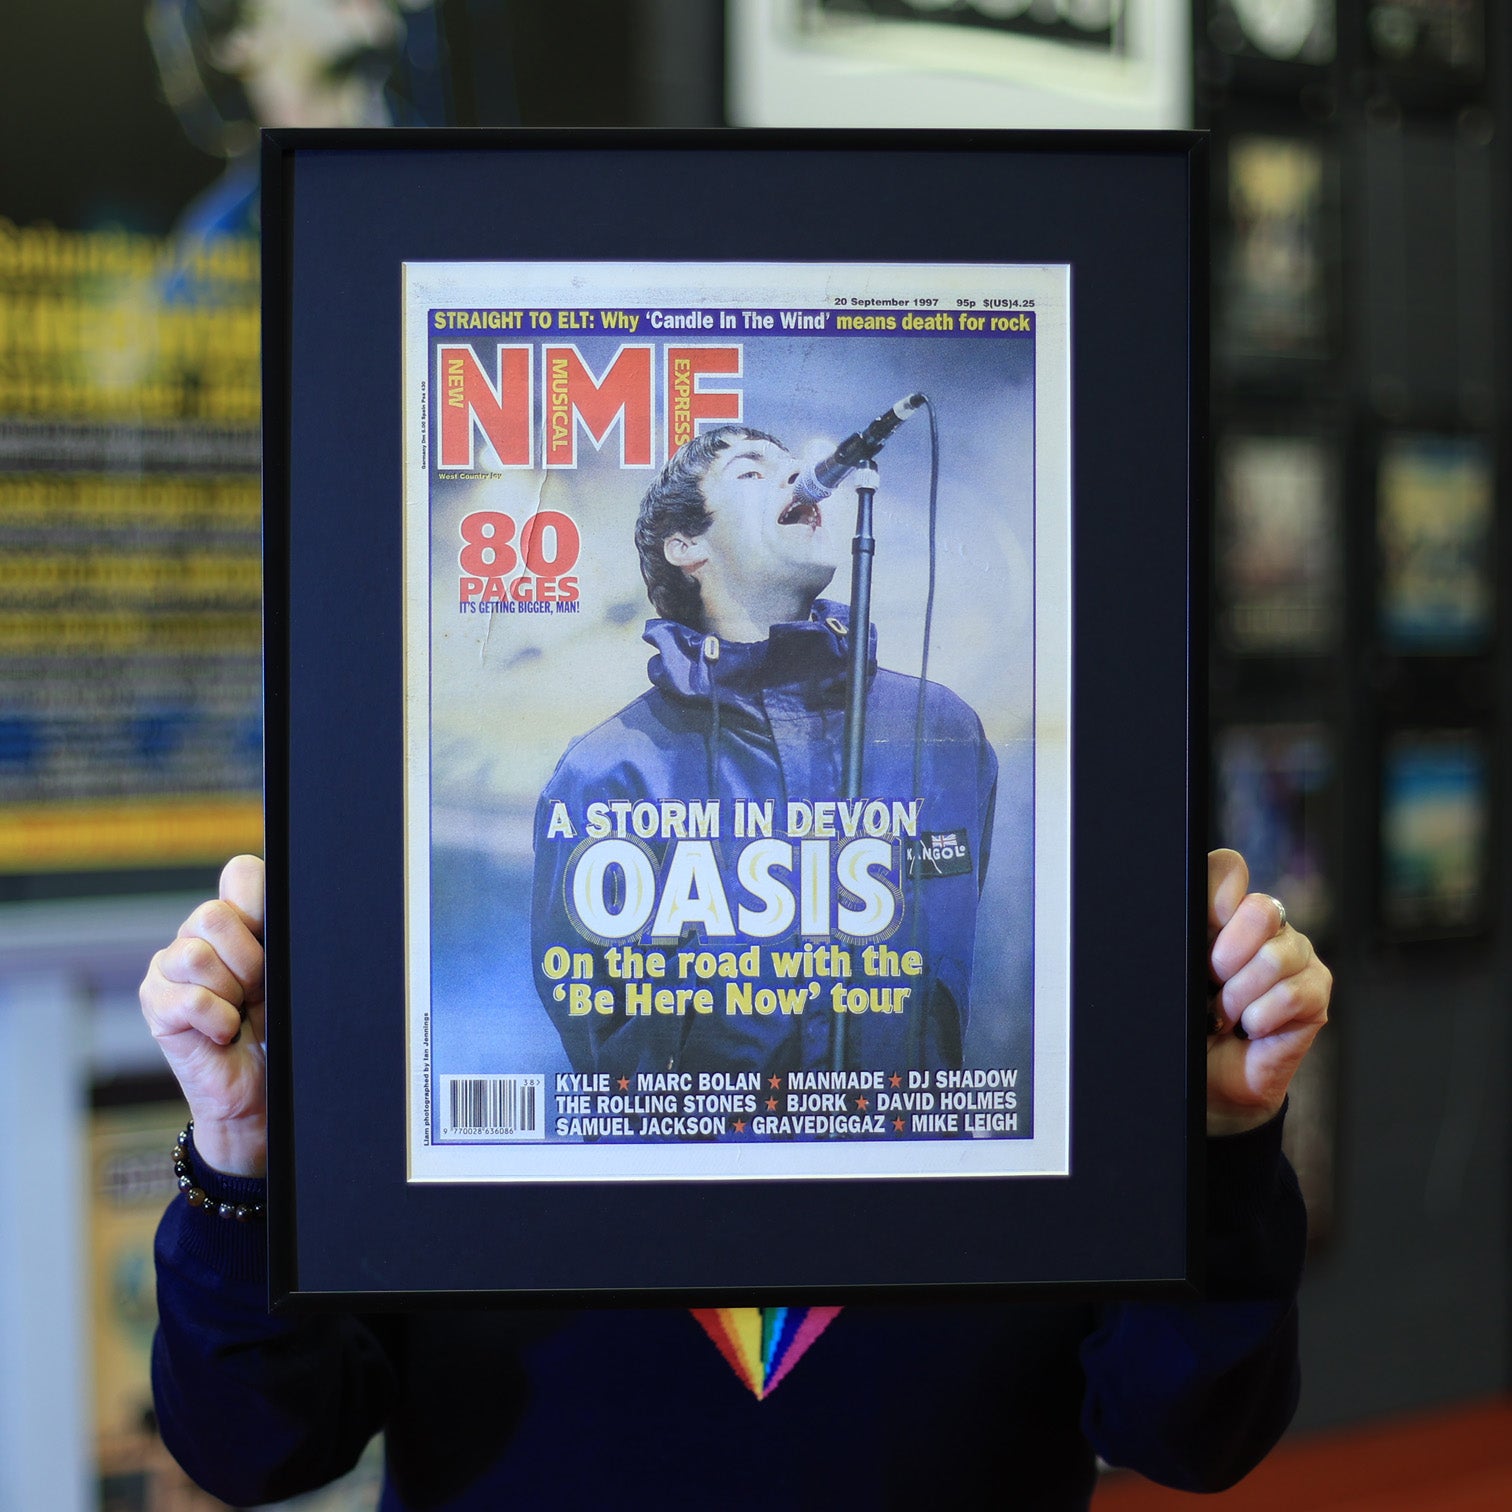 NME Original Cover Oasis 'A Storm In Devon' - New item